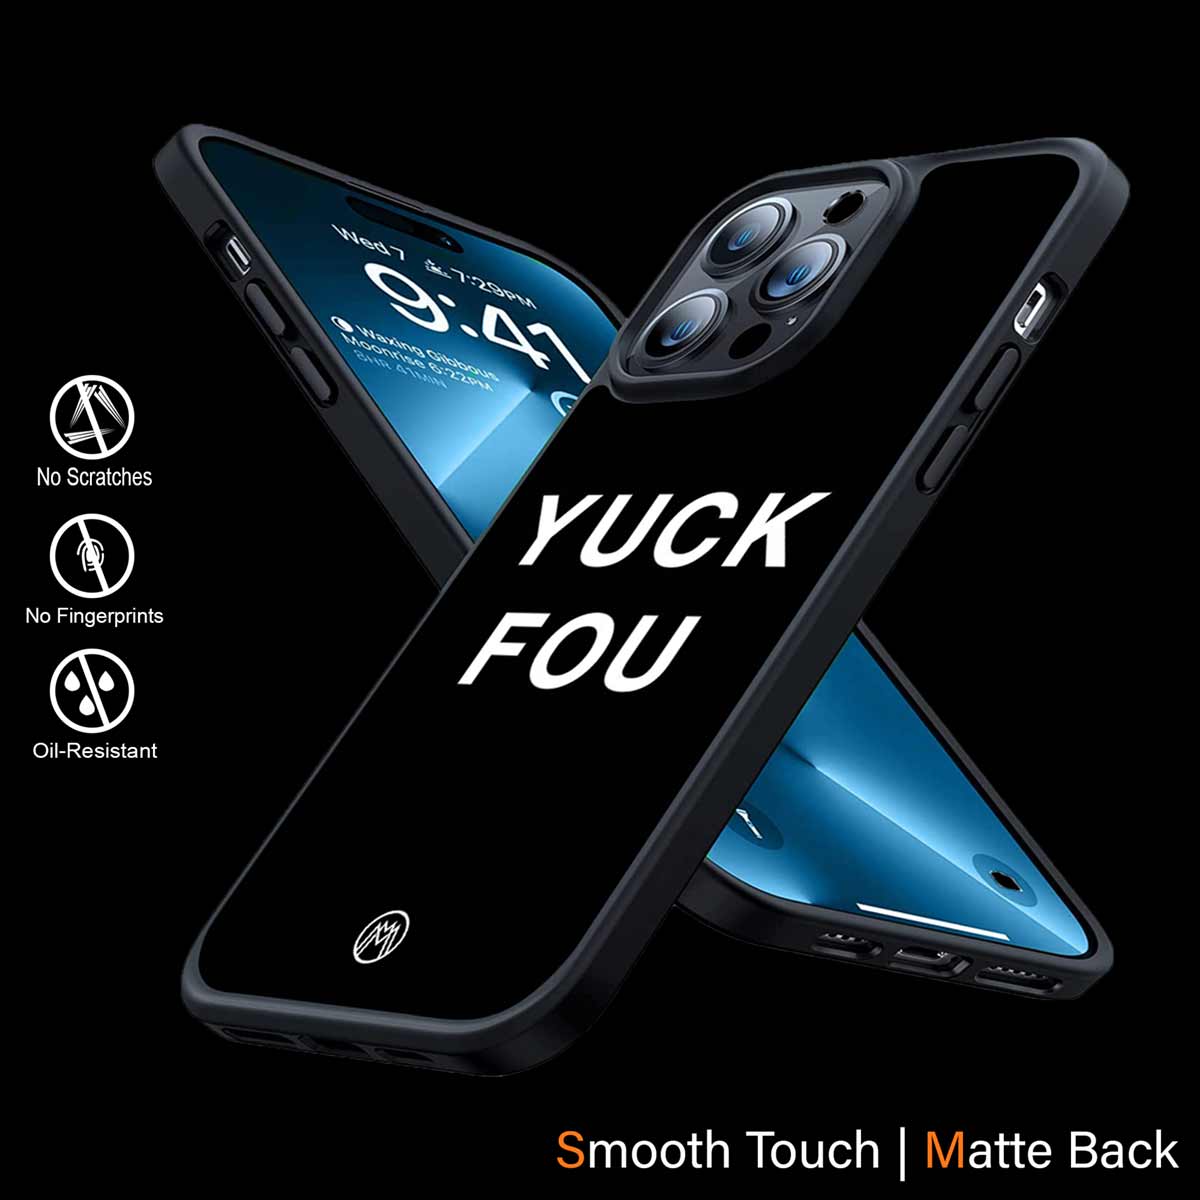 Yuck Fou Phone Cover | MagSafe Case